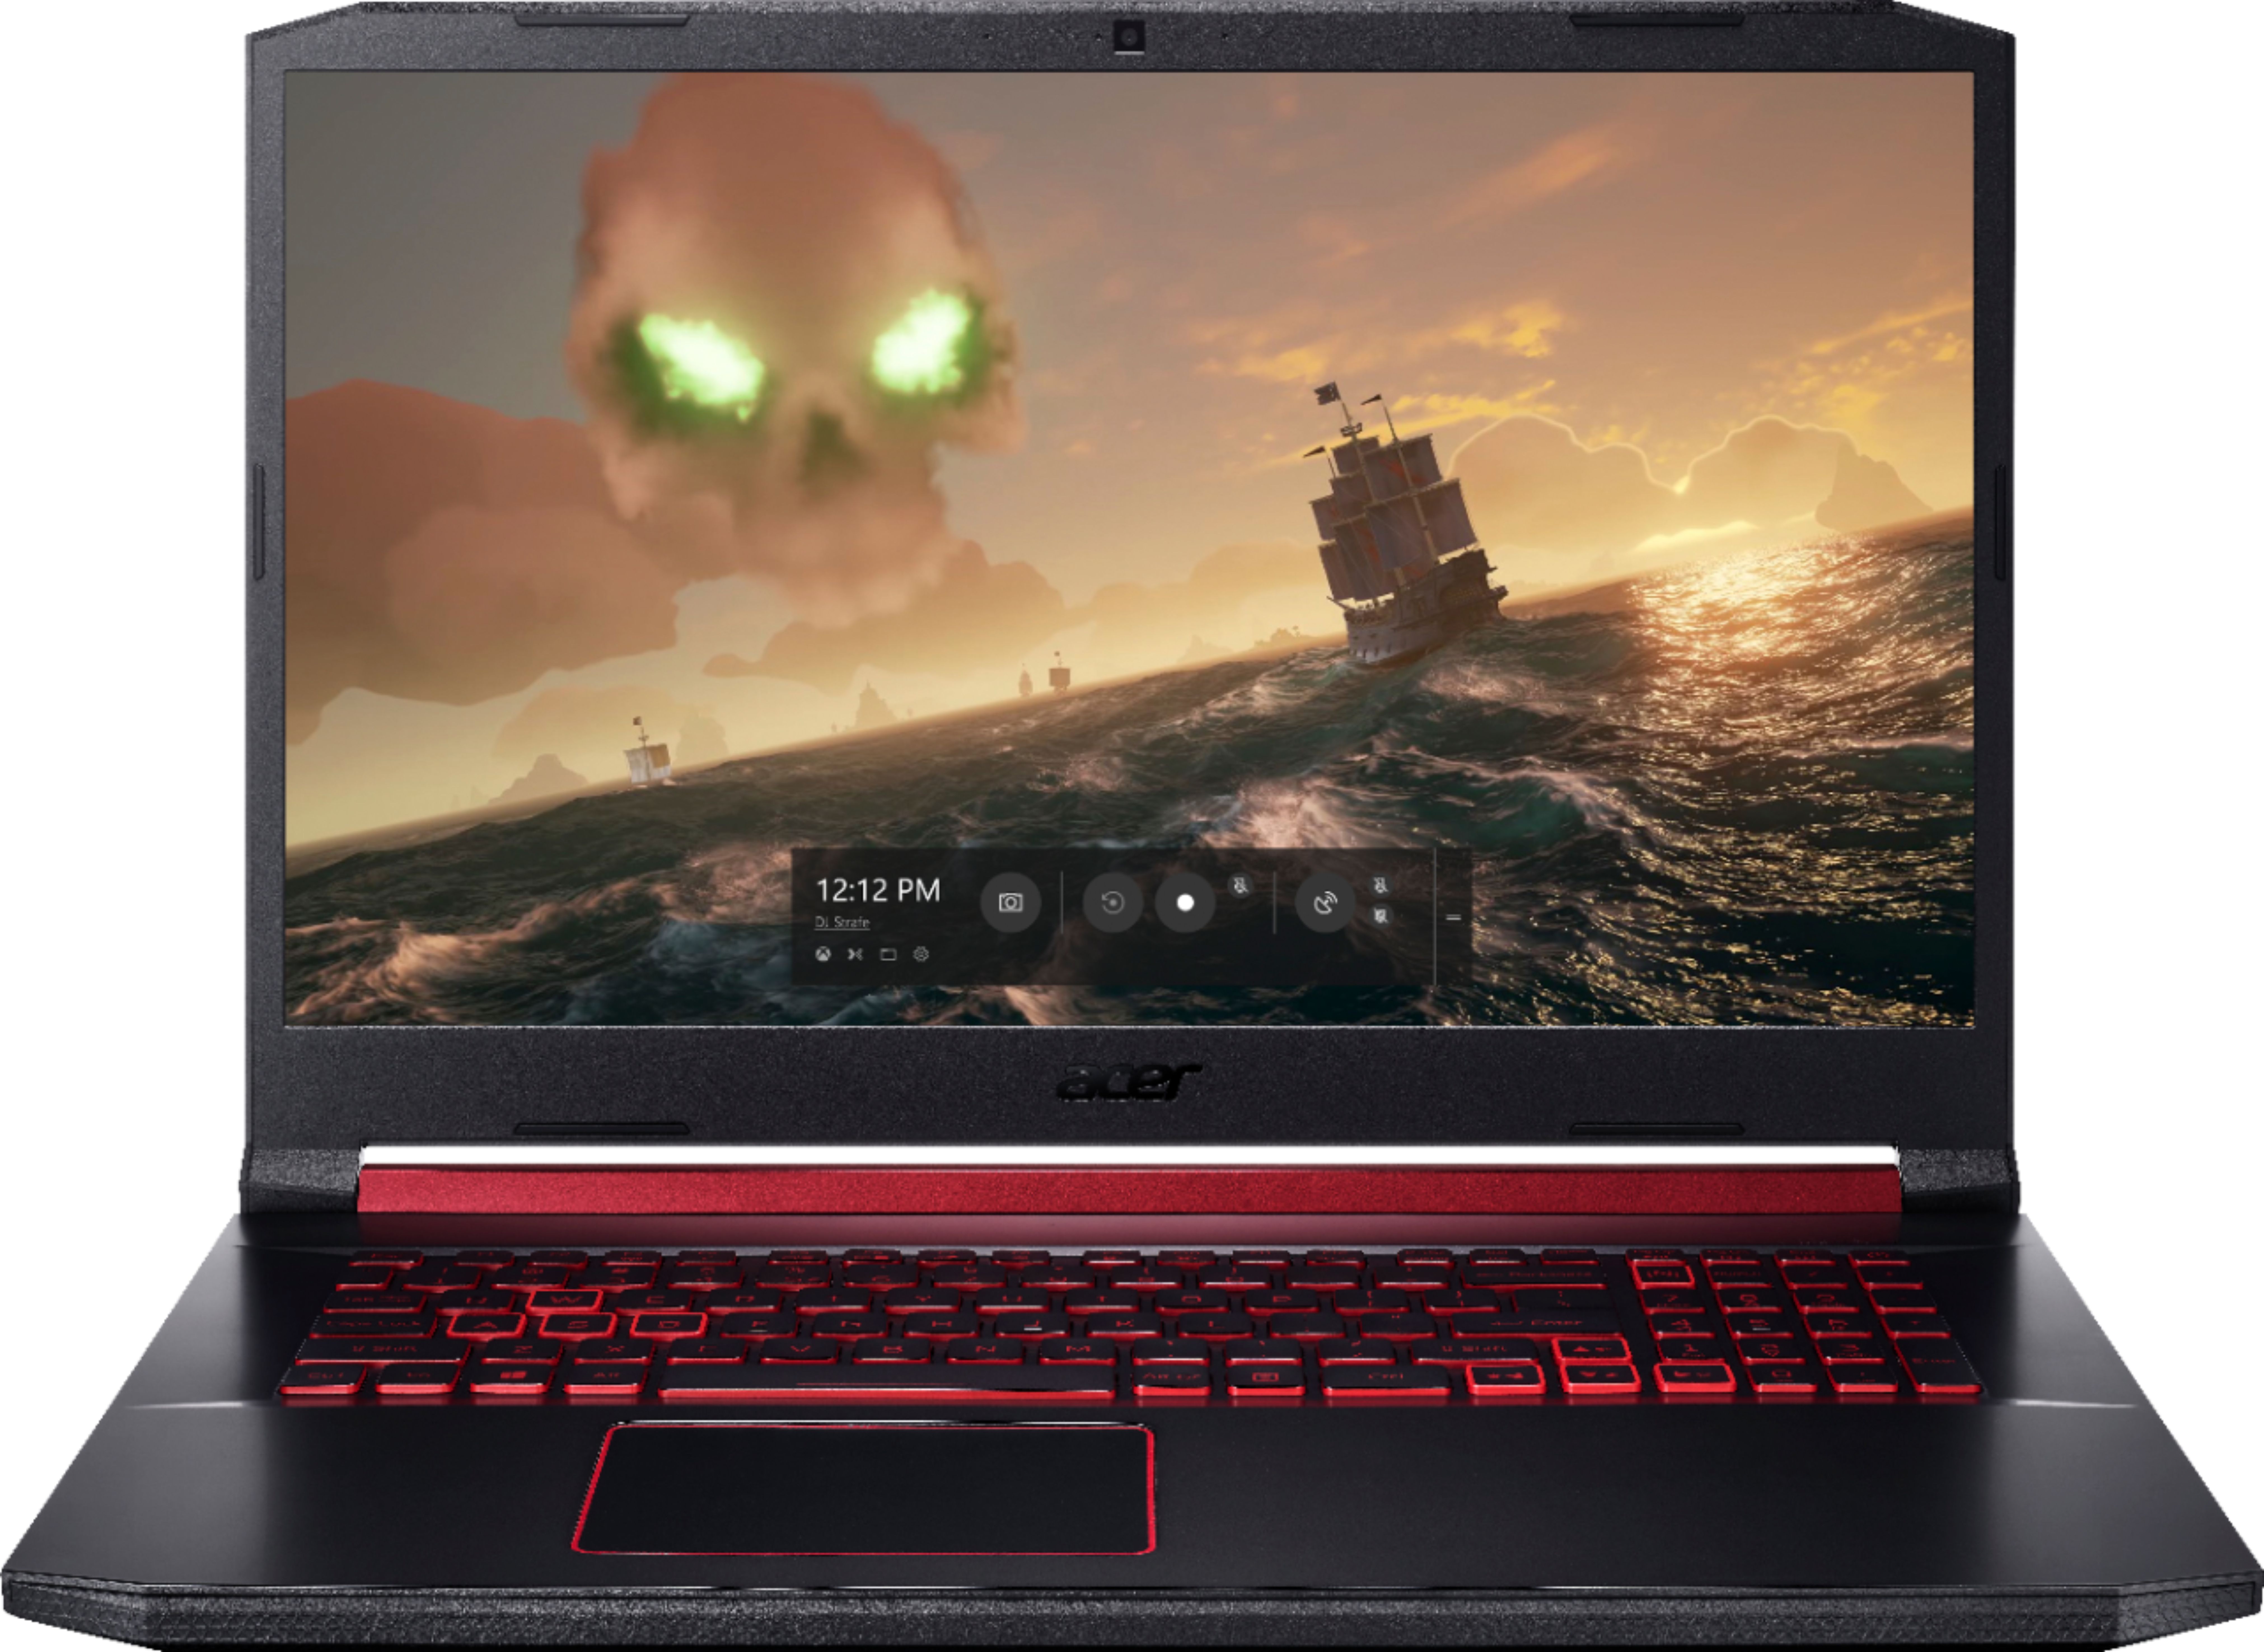 Acer - Nitro 5 17.3 inch Gaming Laptop - Intel Core i5 - 8GB Memory - NVIDIA GeForce GTX 1650 - 512GB Solid State Drive - Black - 1.99